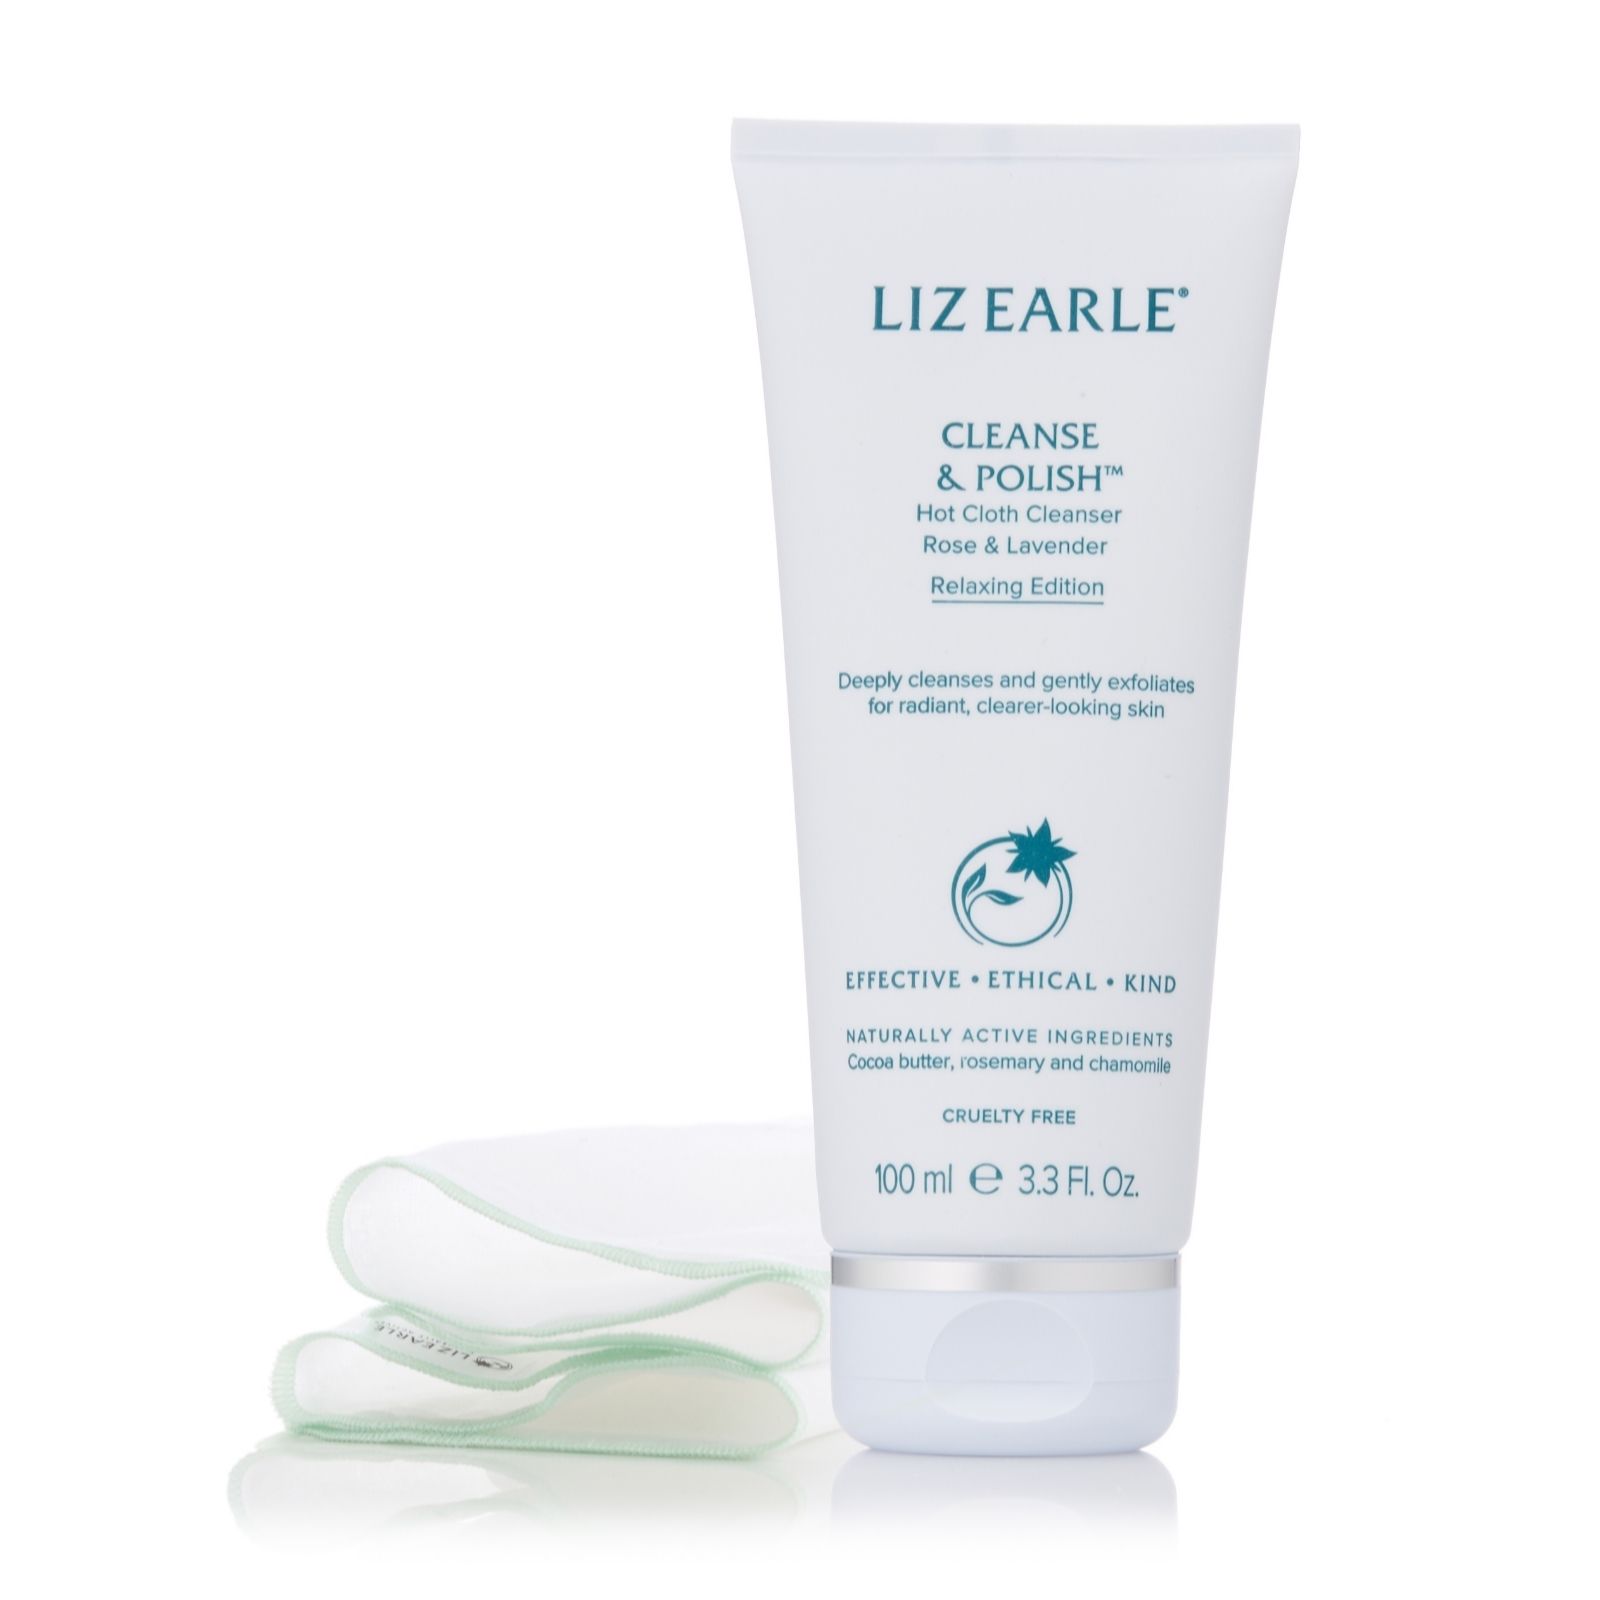 Liz Earle Cleanse And Polish Hot Cloth Cleanser Rose And Lavender Relaxing Edition Qvc Uk